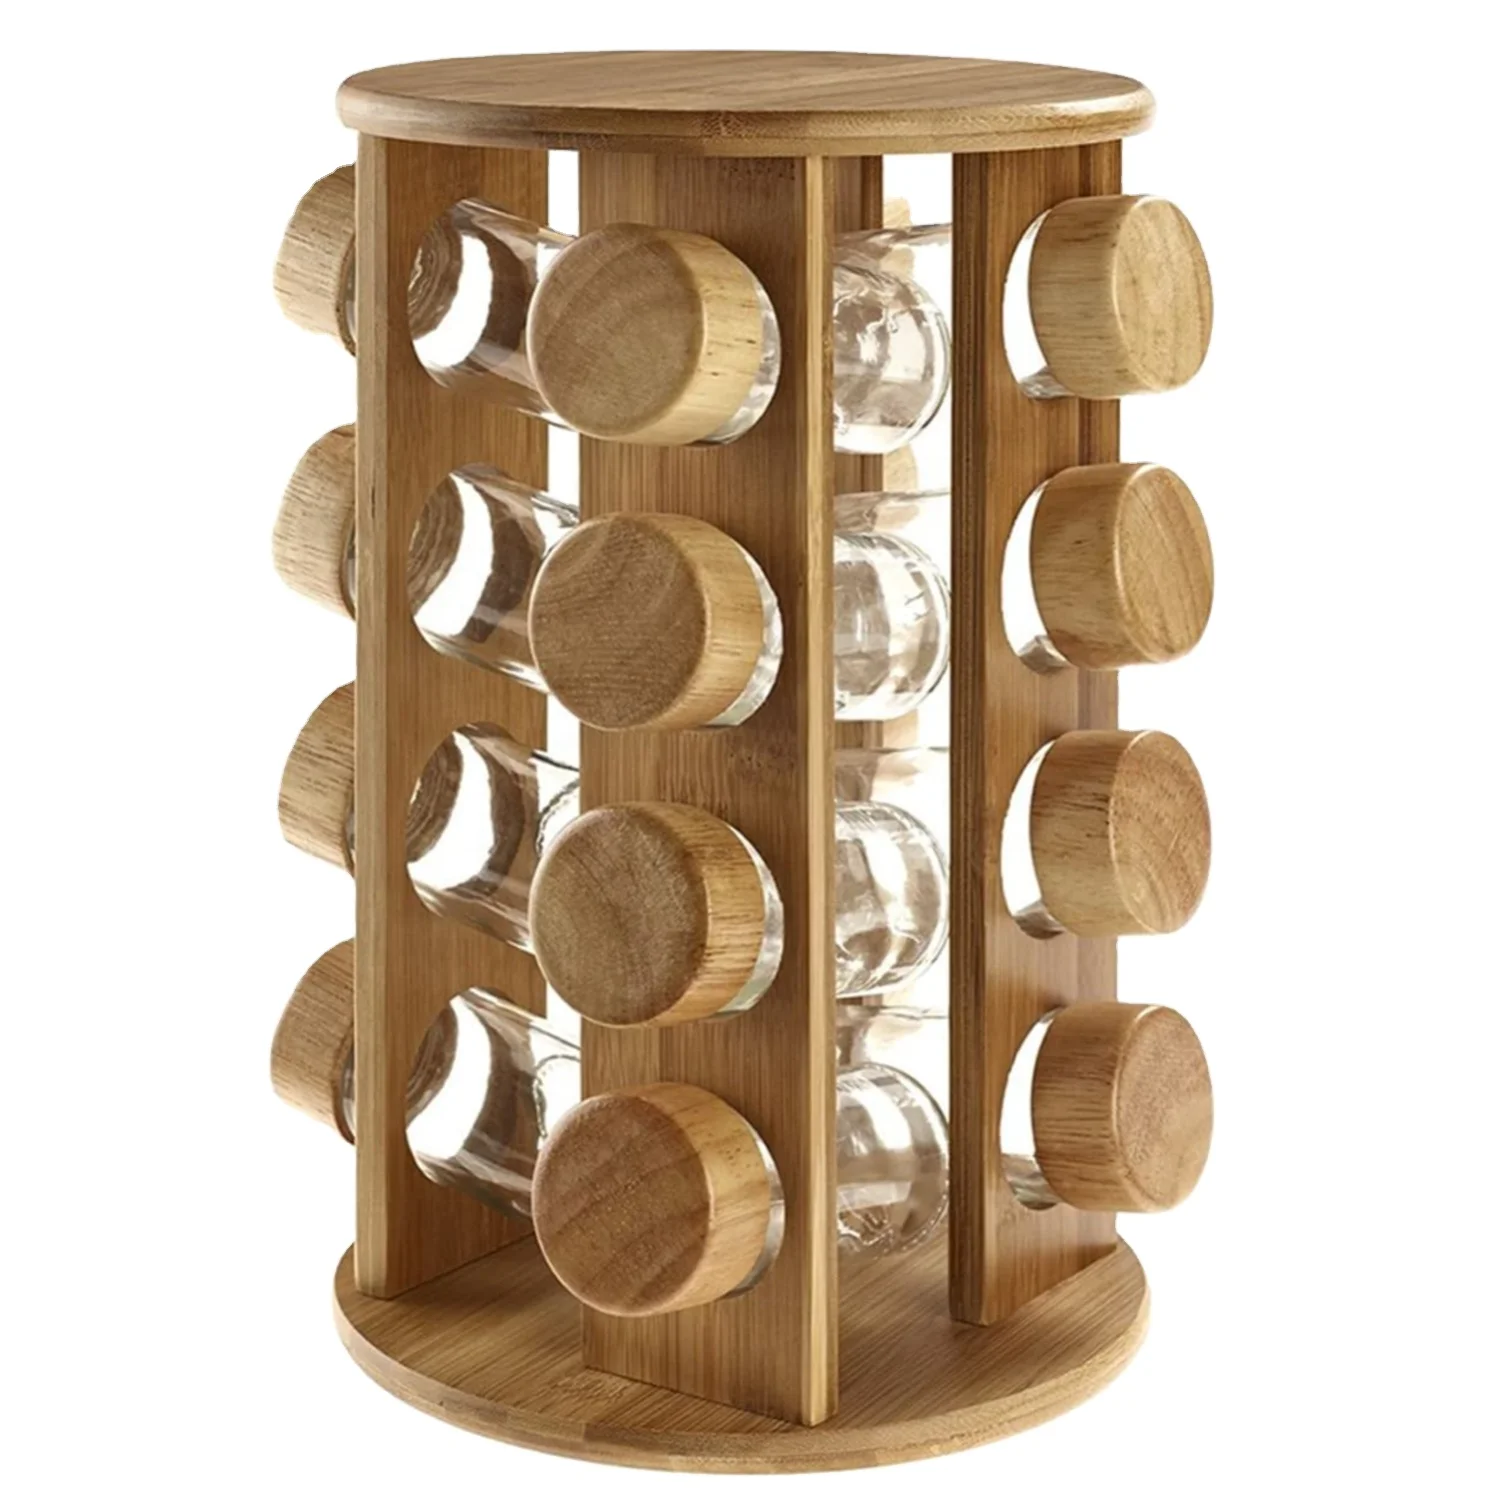 

Sample Avaliable Wholesale Kitchen Bamboo Wooden Rotating Revolving Spice Organizer Jar Rack Set with 16 Glass Jar, Natural bamboo